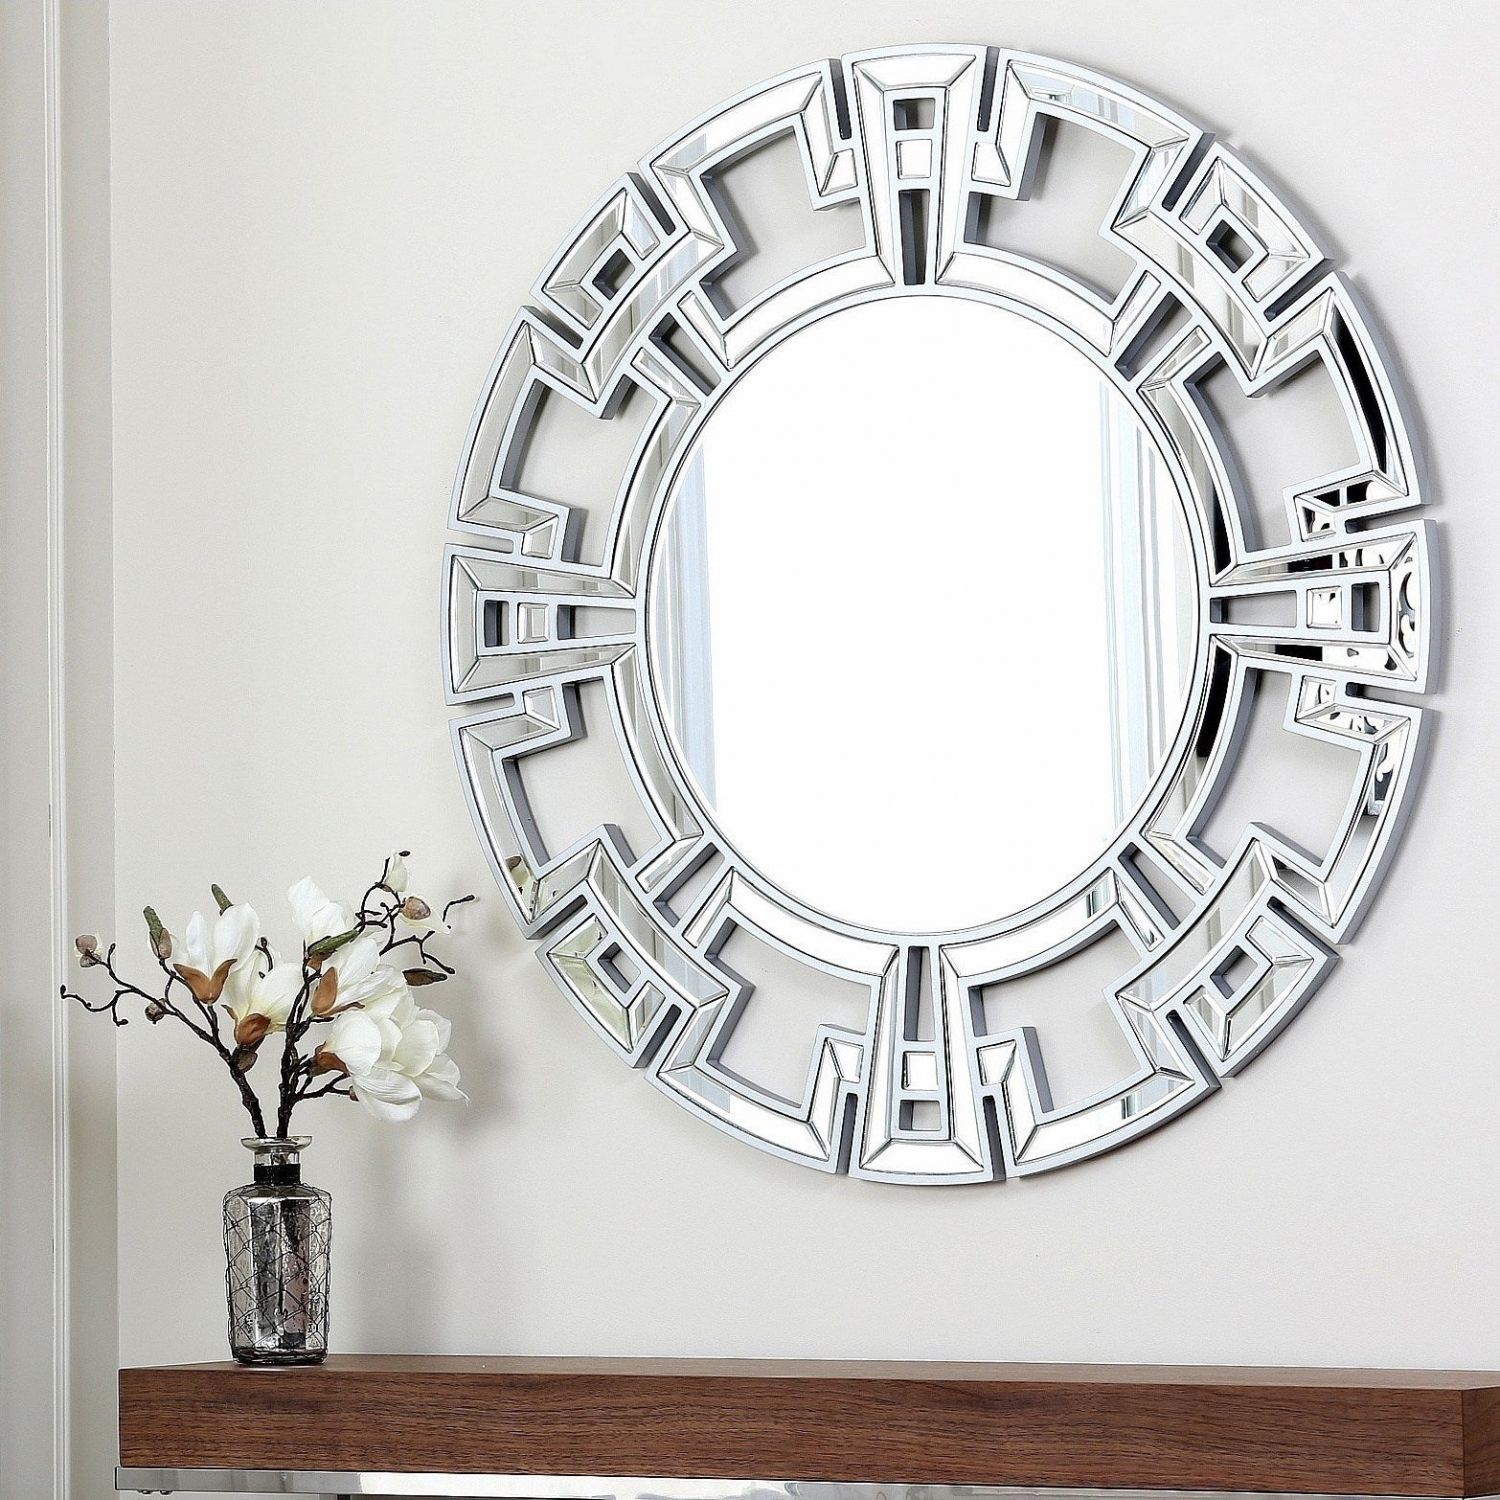 Large Round Silver Wall Mirror Geometric Greek Key Design Glam Mod Chic Within Vertical Round Wall Mirrors (View 10 of 15)